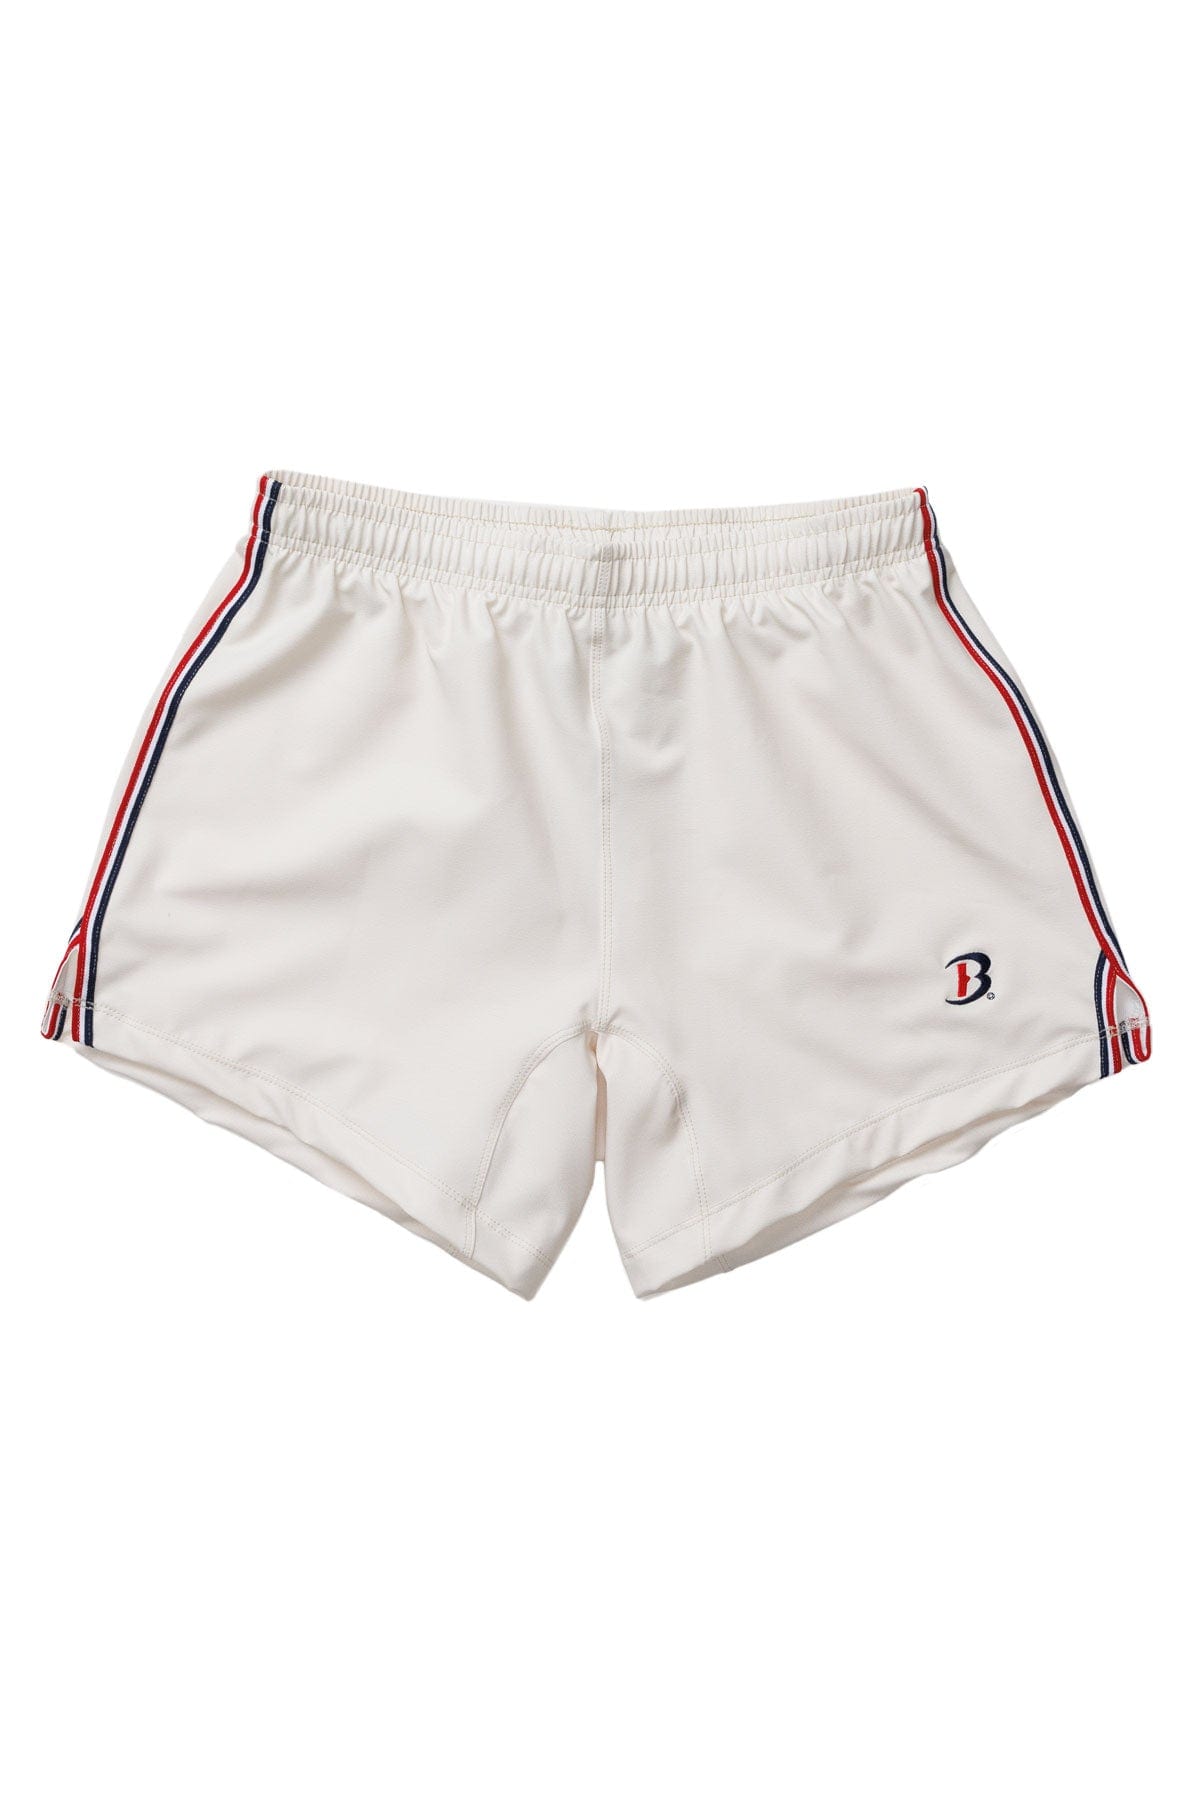 BOATHOUSE Rugby Unisex Shorts Off-White / Small